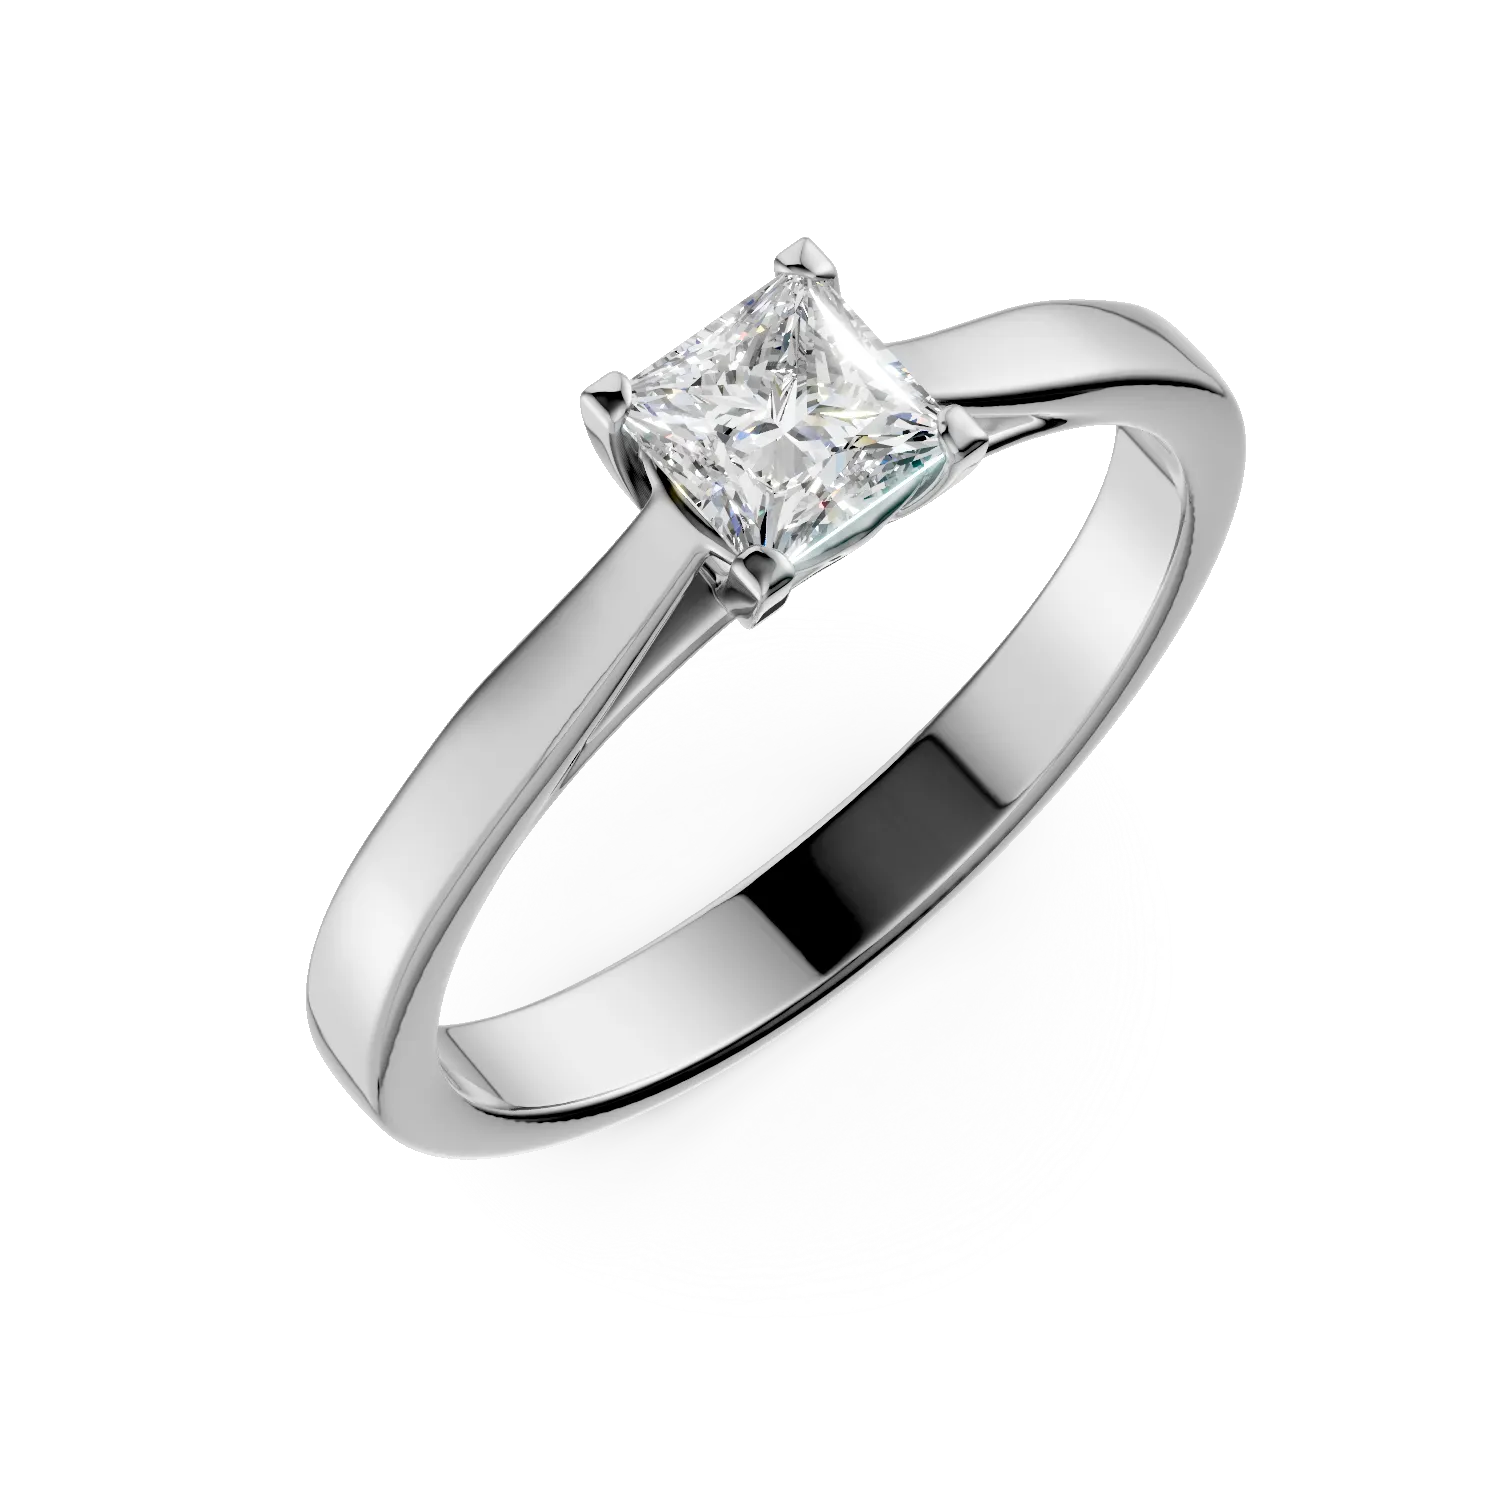 White gold engagement ring with 0.5ct solitaire diamond